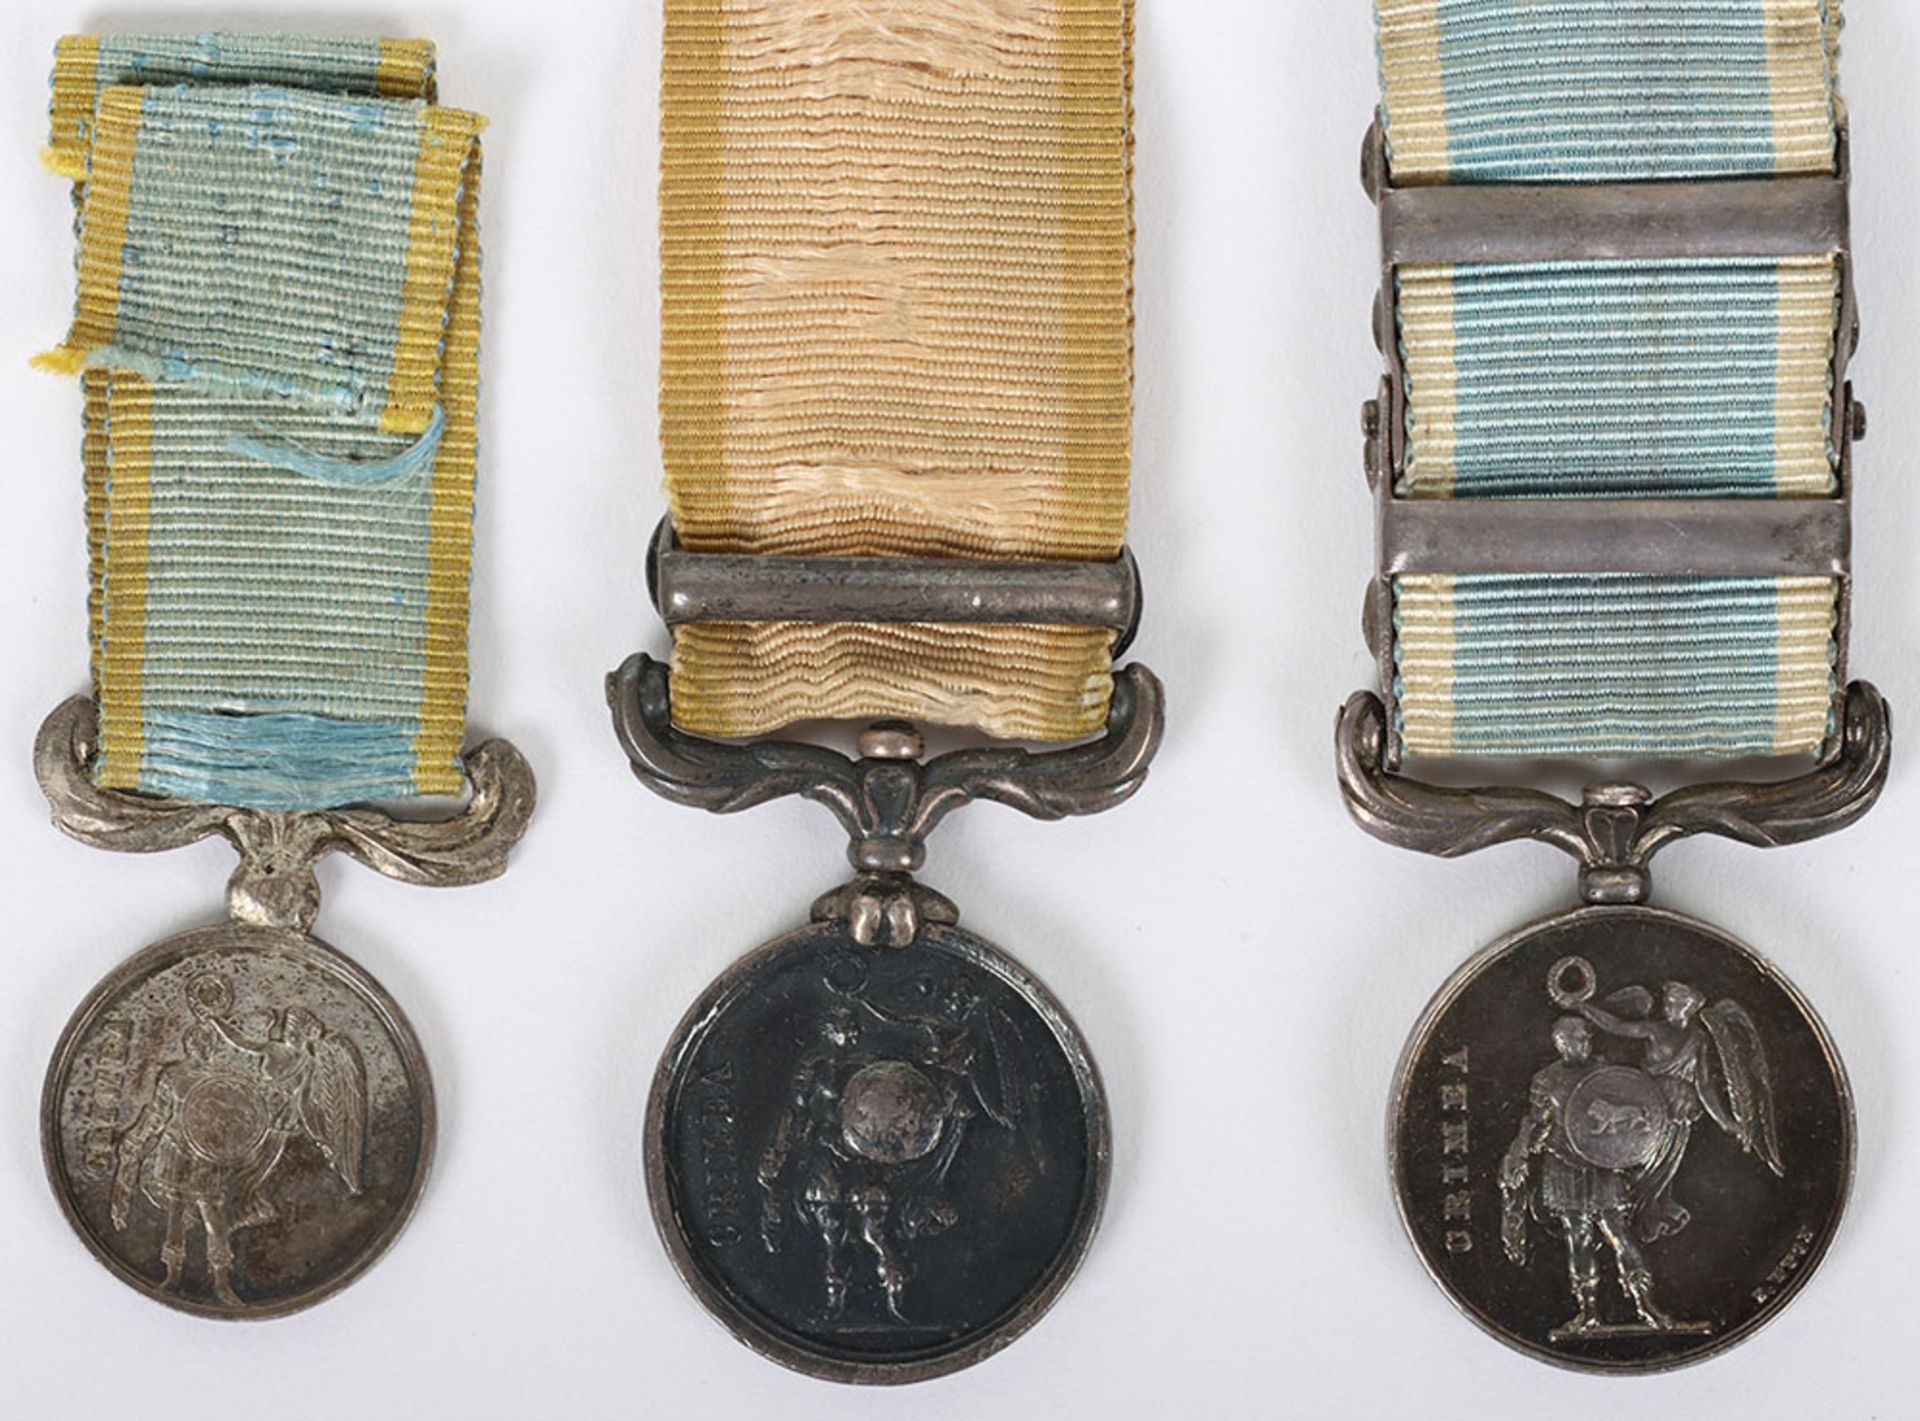 Collection of 5 Contemporary Victorian Miniature Medals for Service in the Crimea and the Baltic - Image 6 of 9